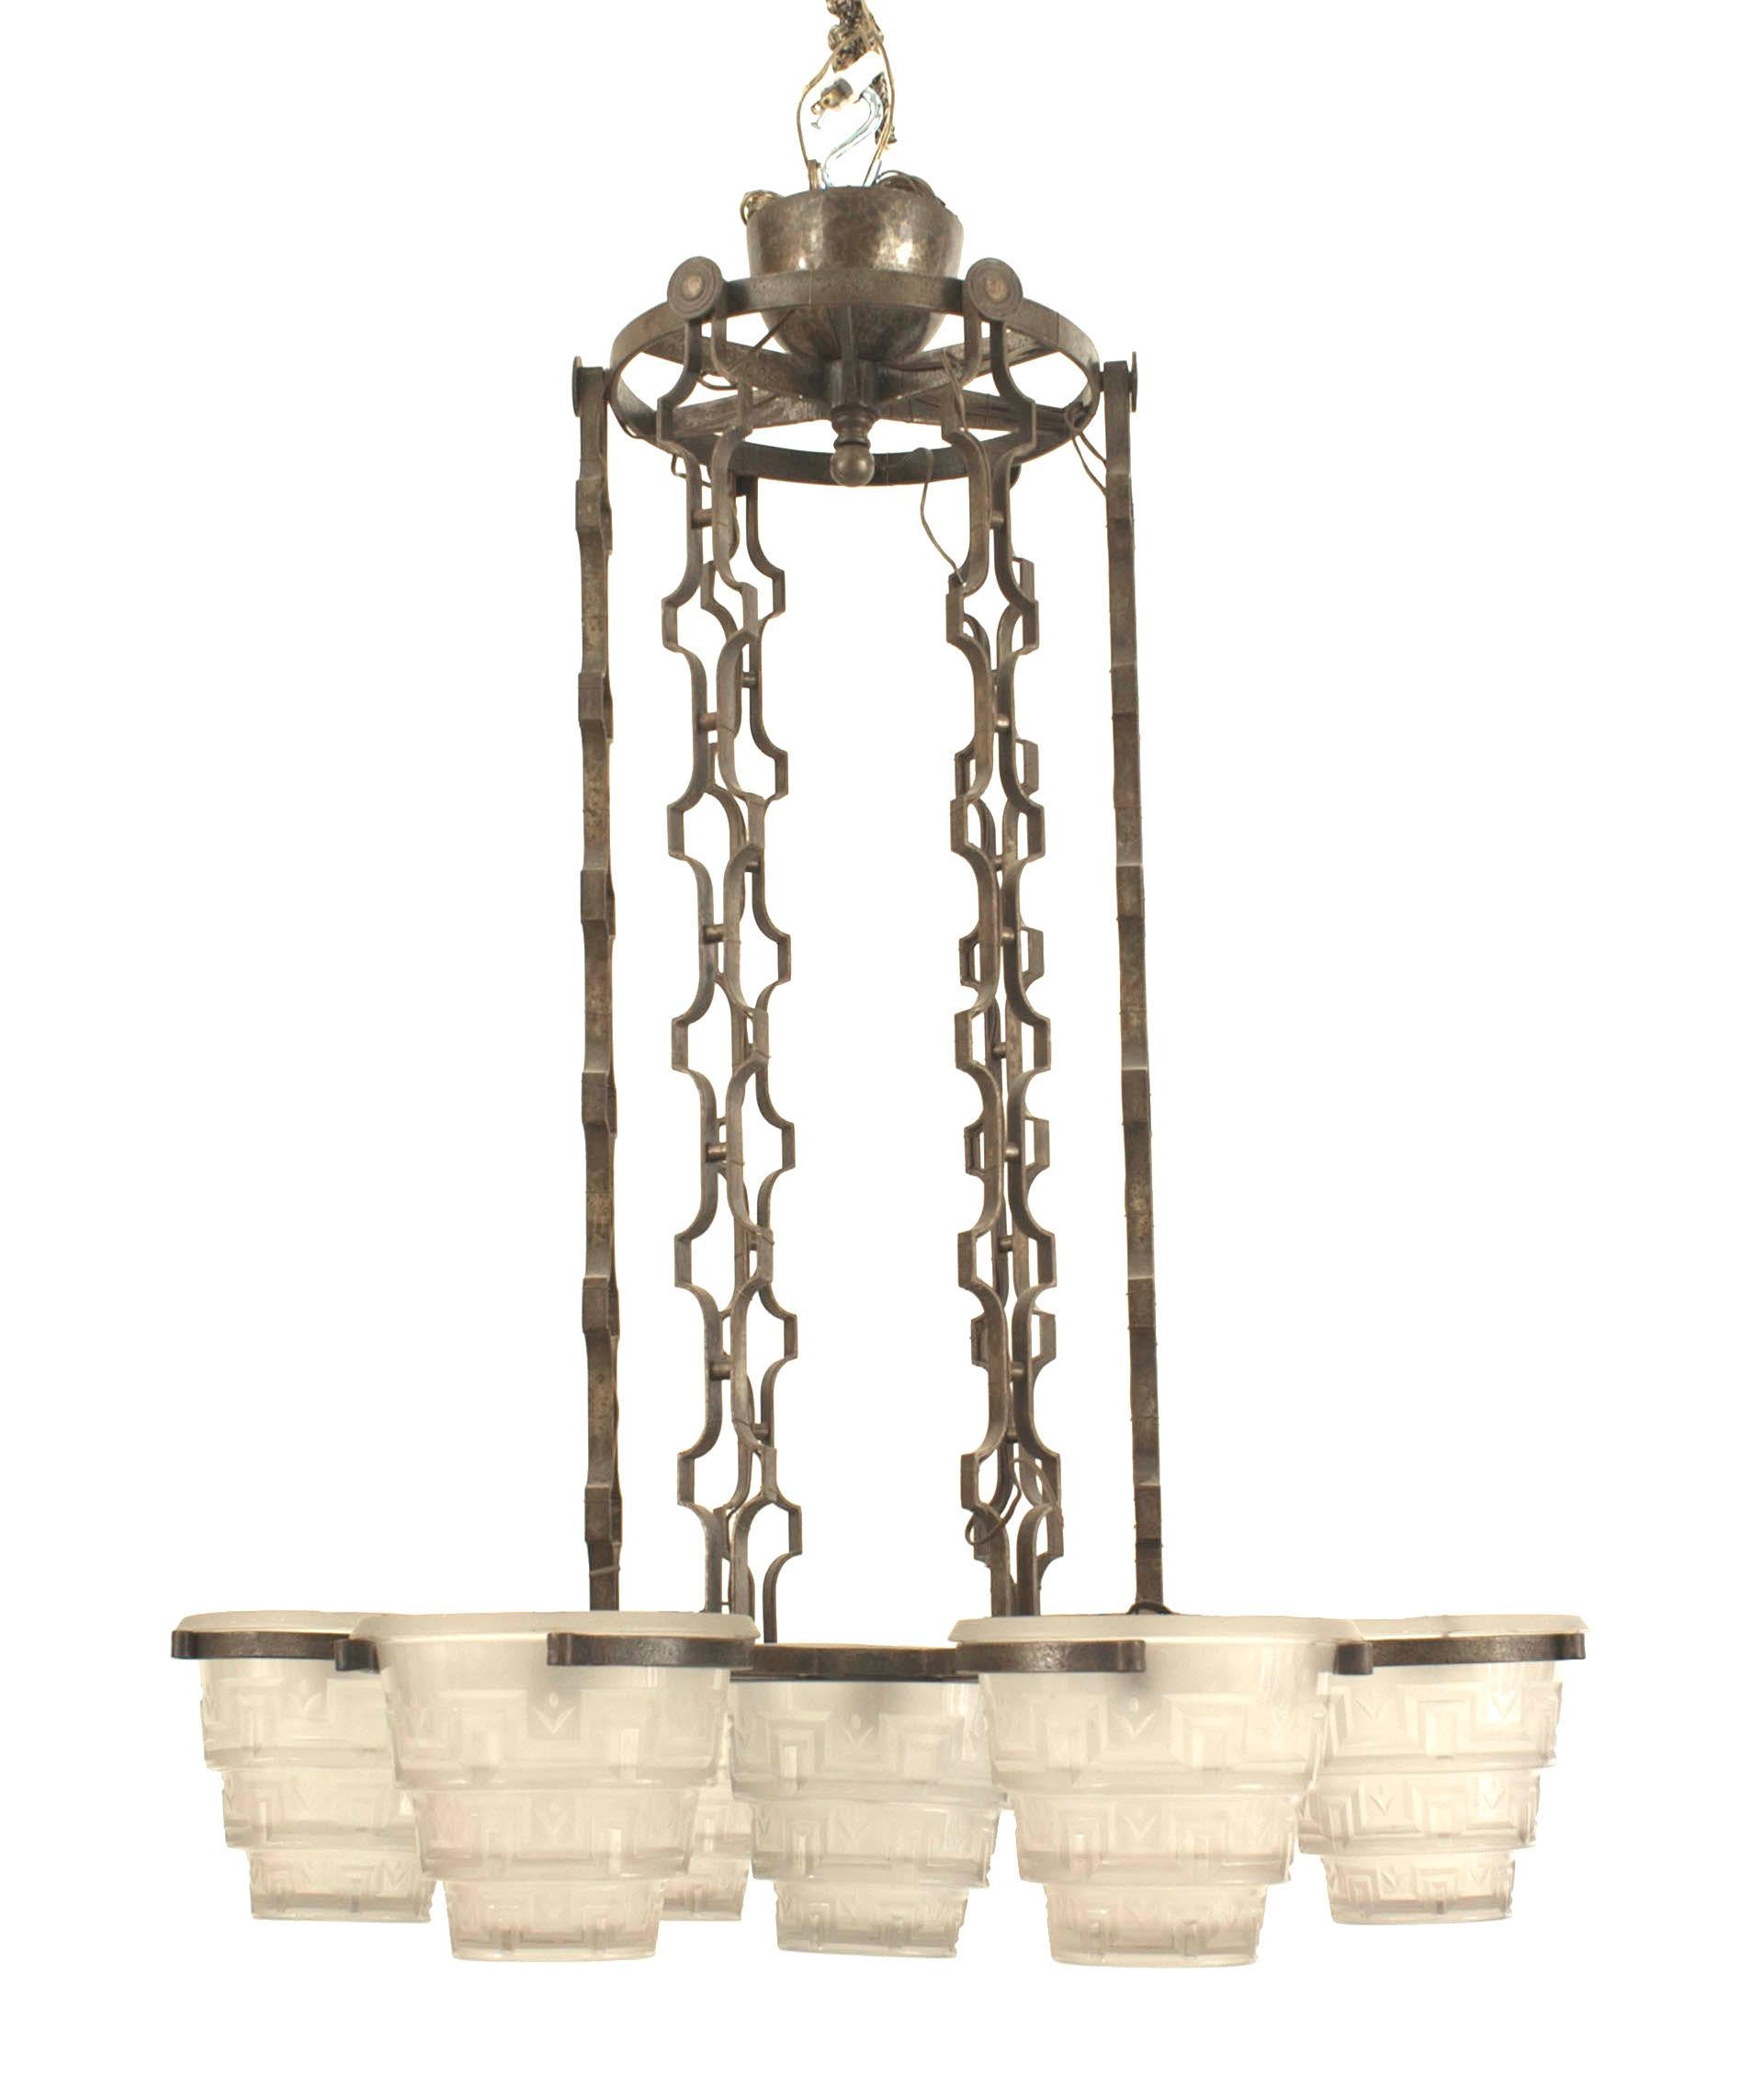 French Art Deco (circa 1930) wrought iron chandelier with 6 arms holding tiered conical glass shades (by Muller) emanating from a center shade & suspended by chains (Attributed to Edgar Brandt).
 